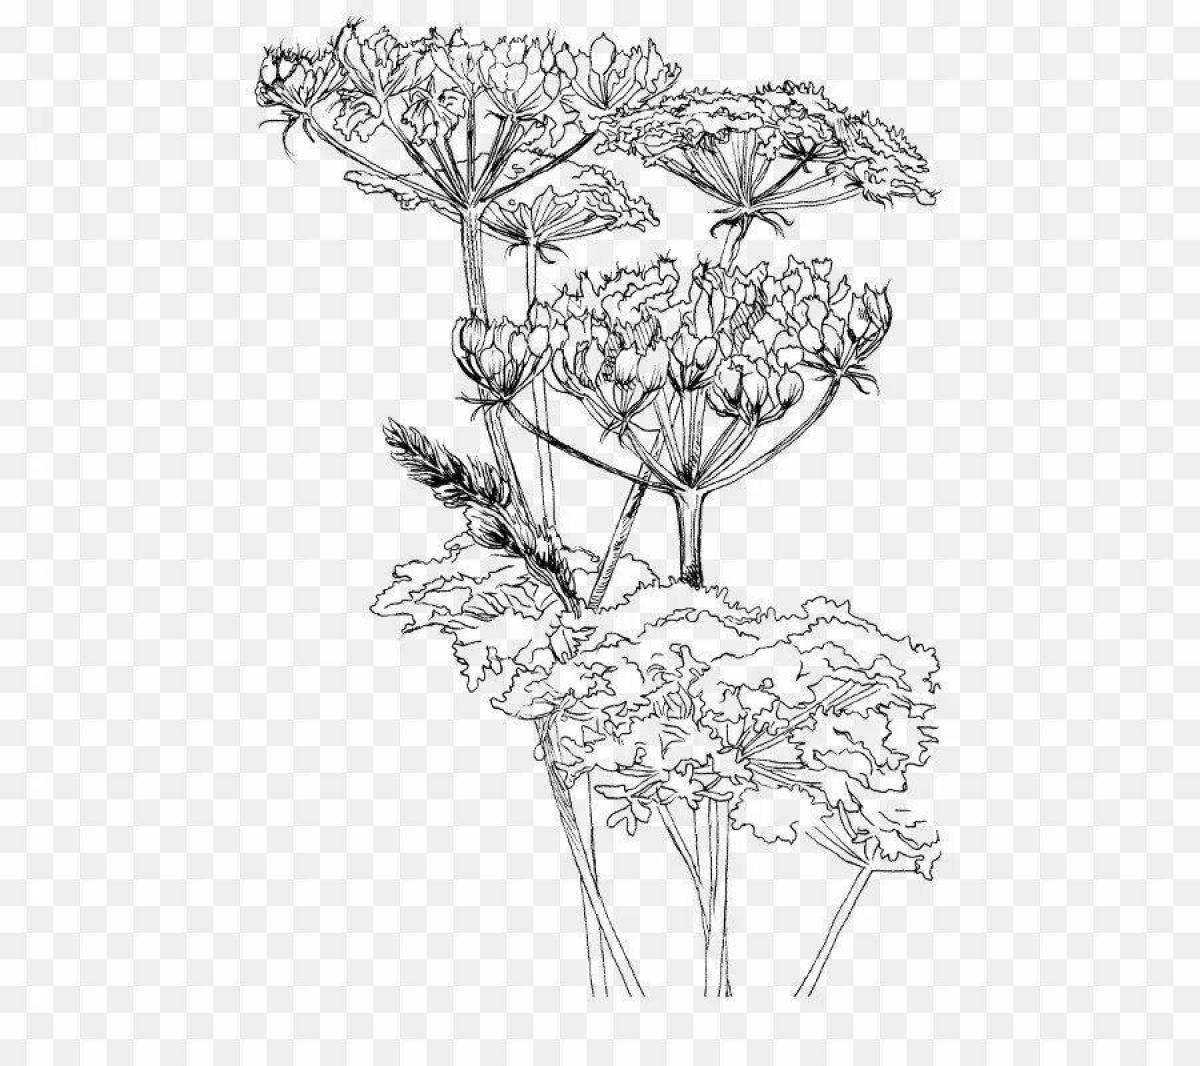 Awesome hogweed coloring page